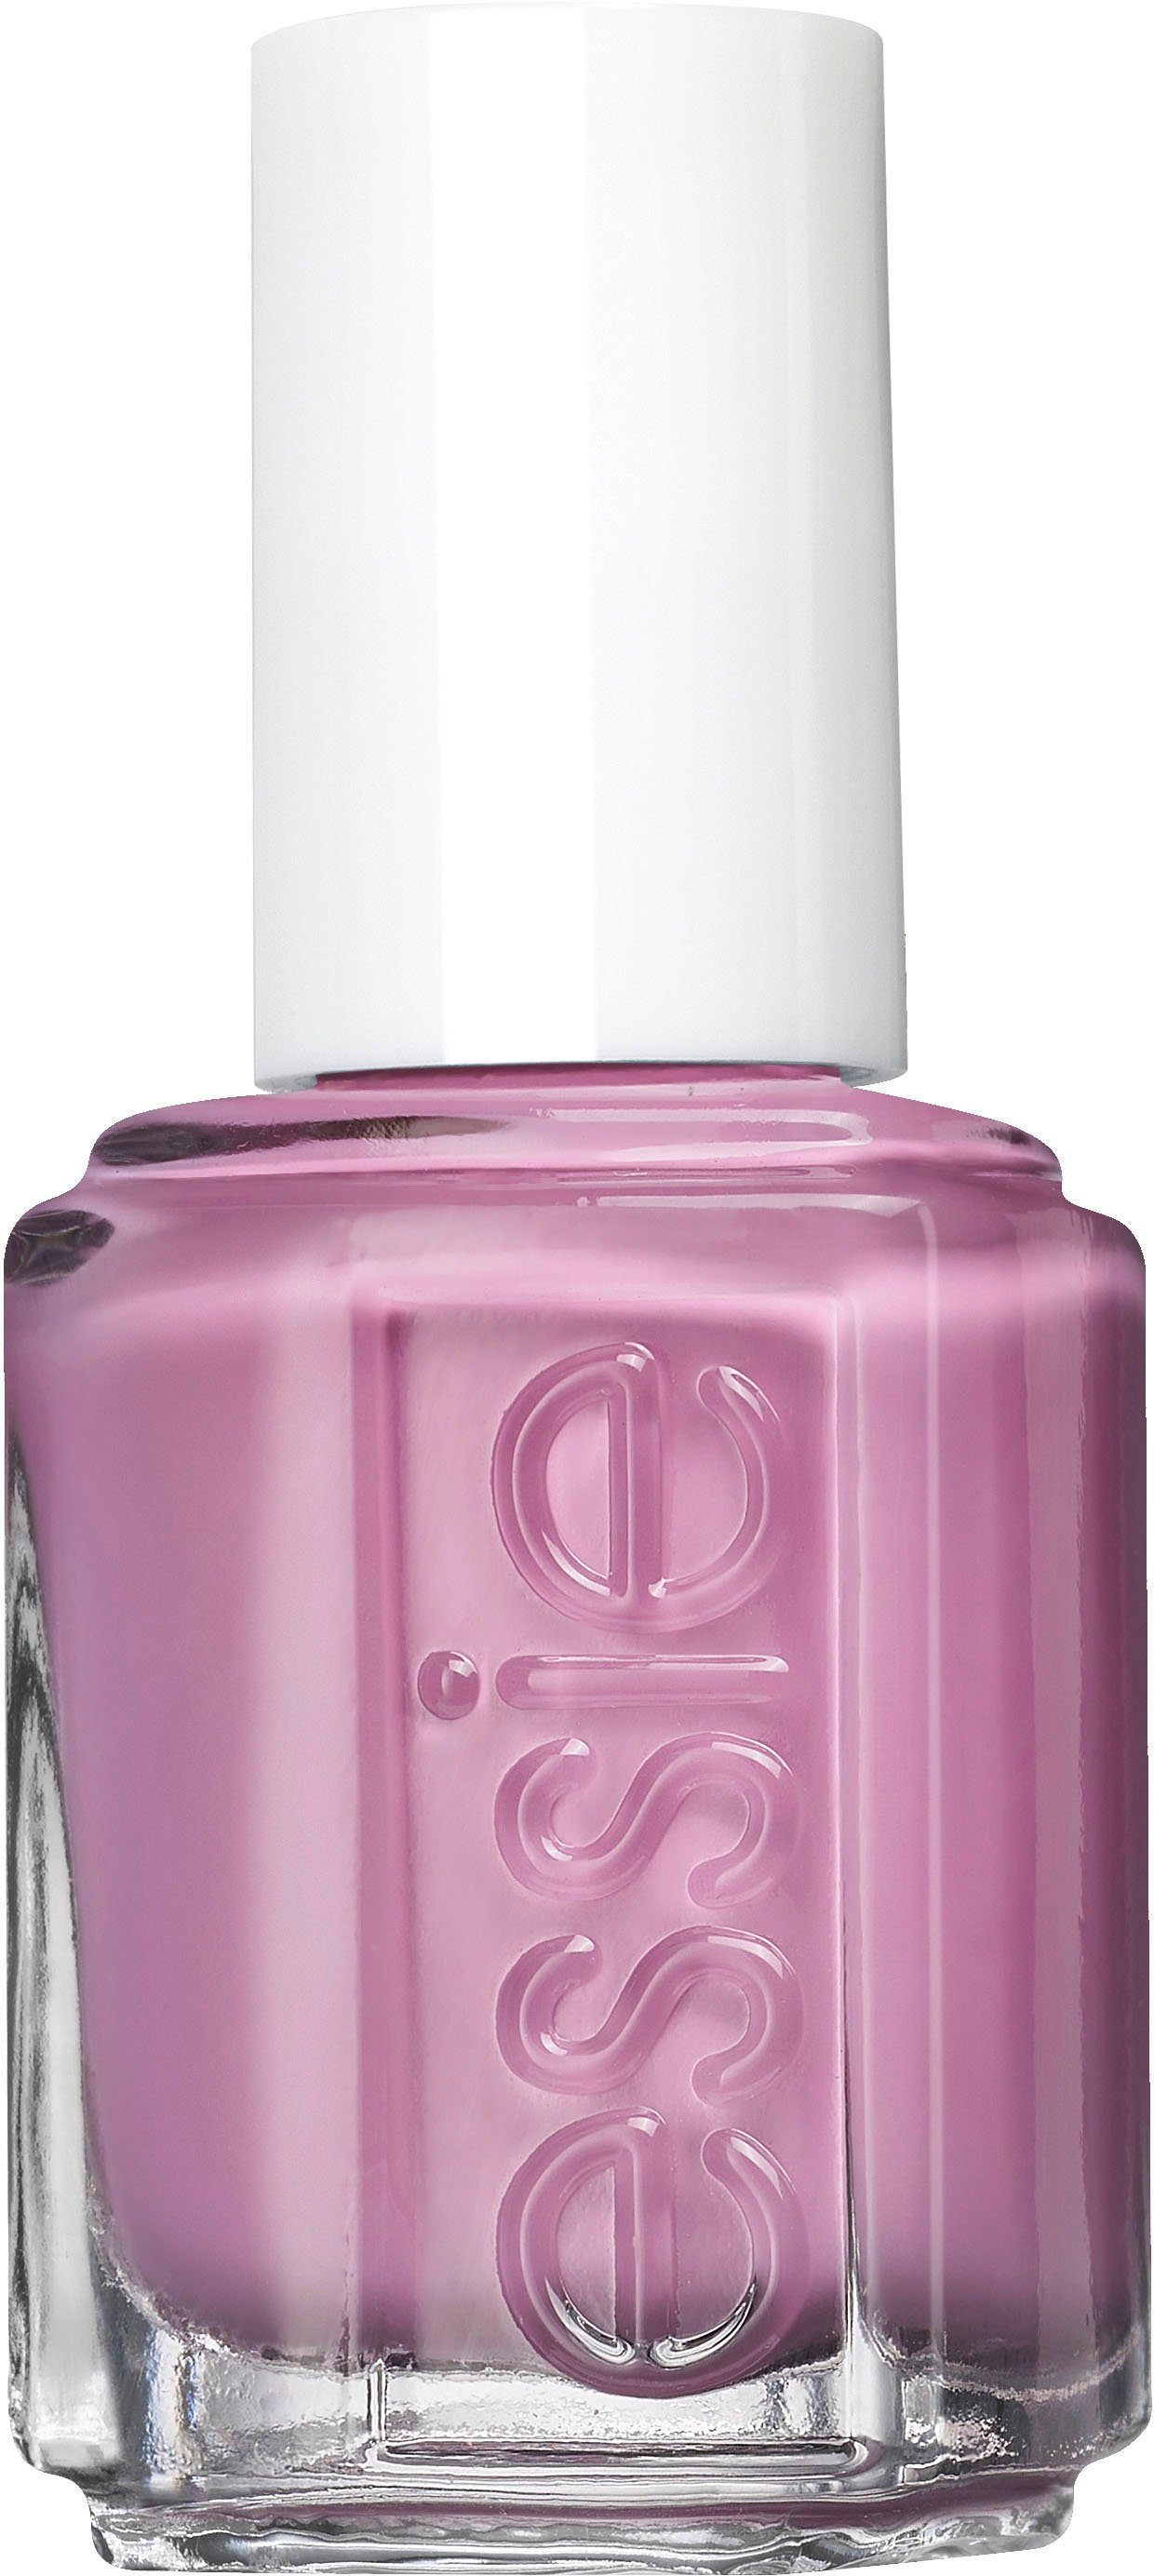 Nr. you suits Lilatöne Nagellack 718 swell essie